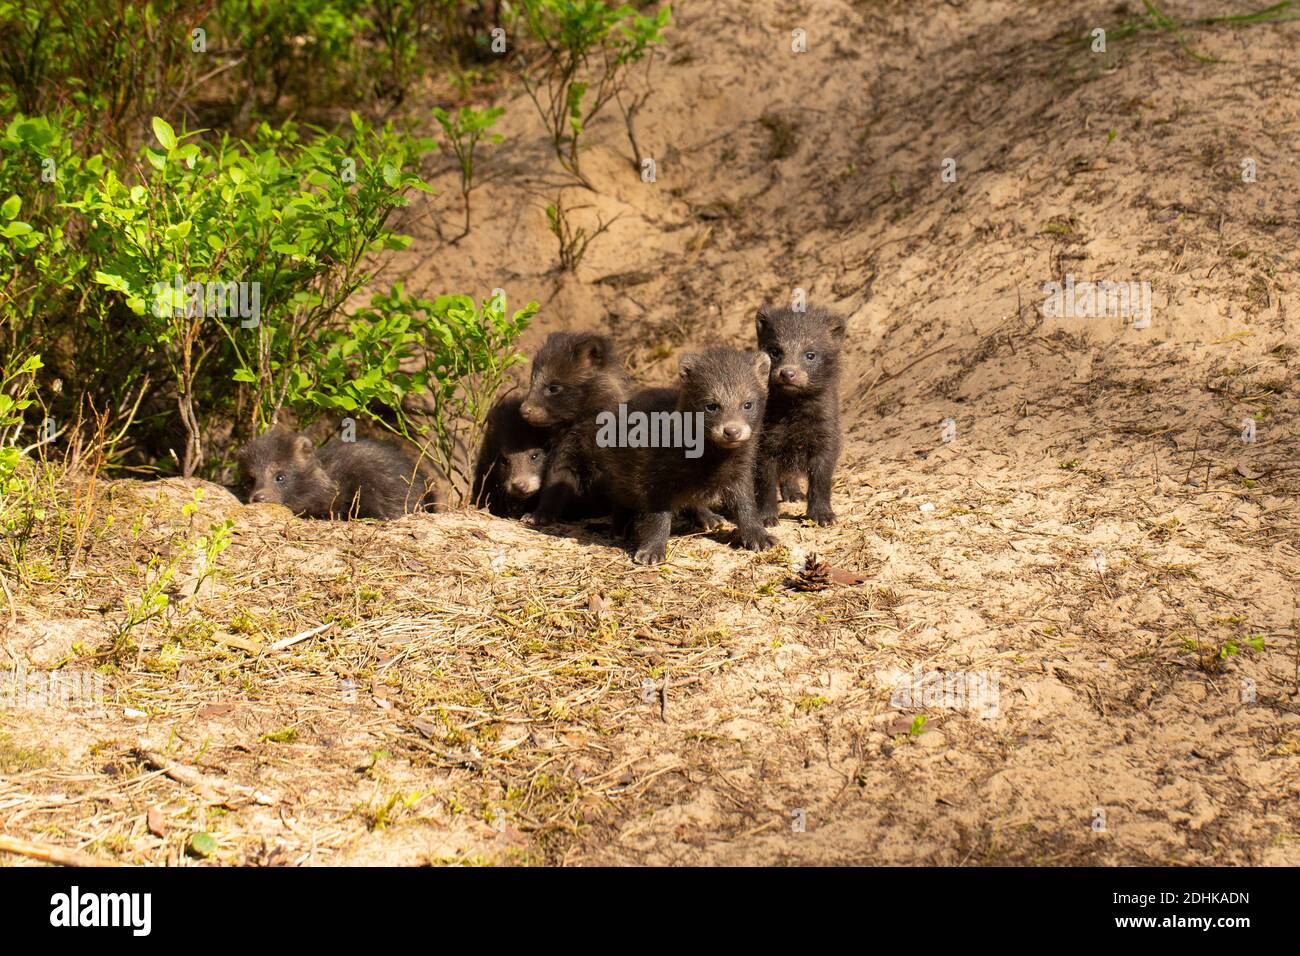 Five young curious raccoons standing next to their hidden cave entrance in the wilderness. Stock Photo